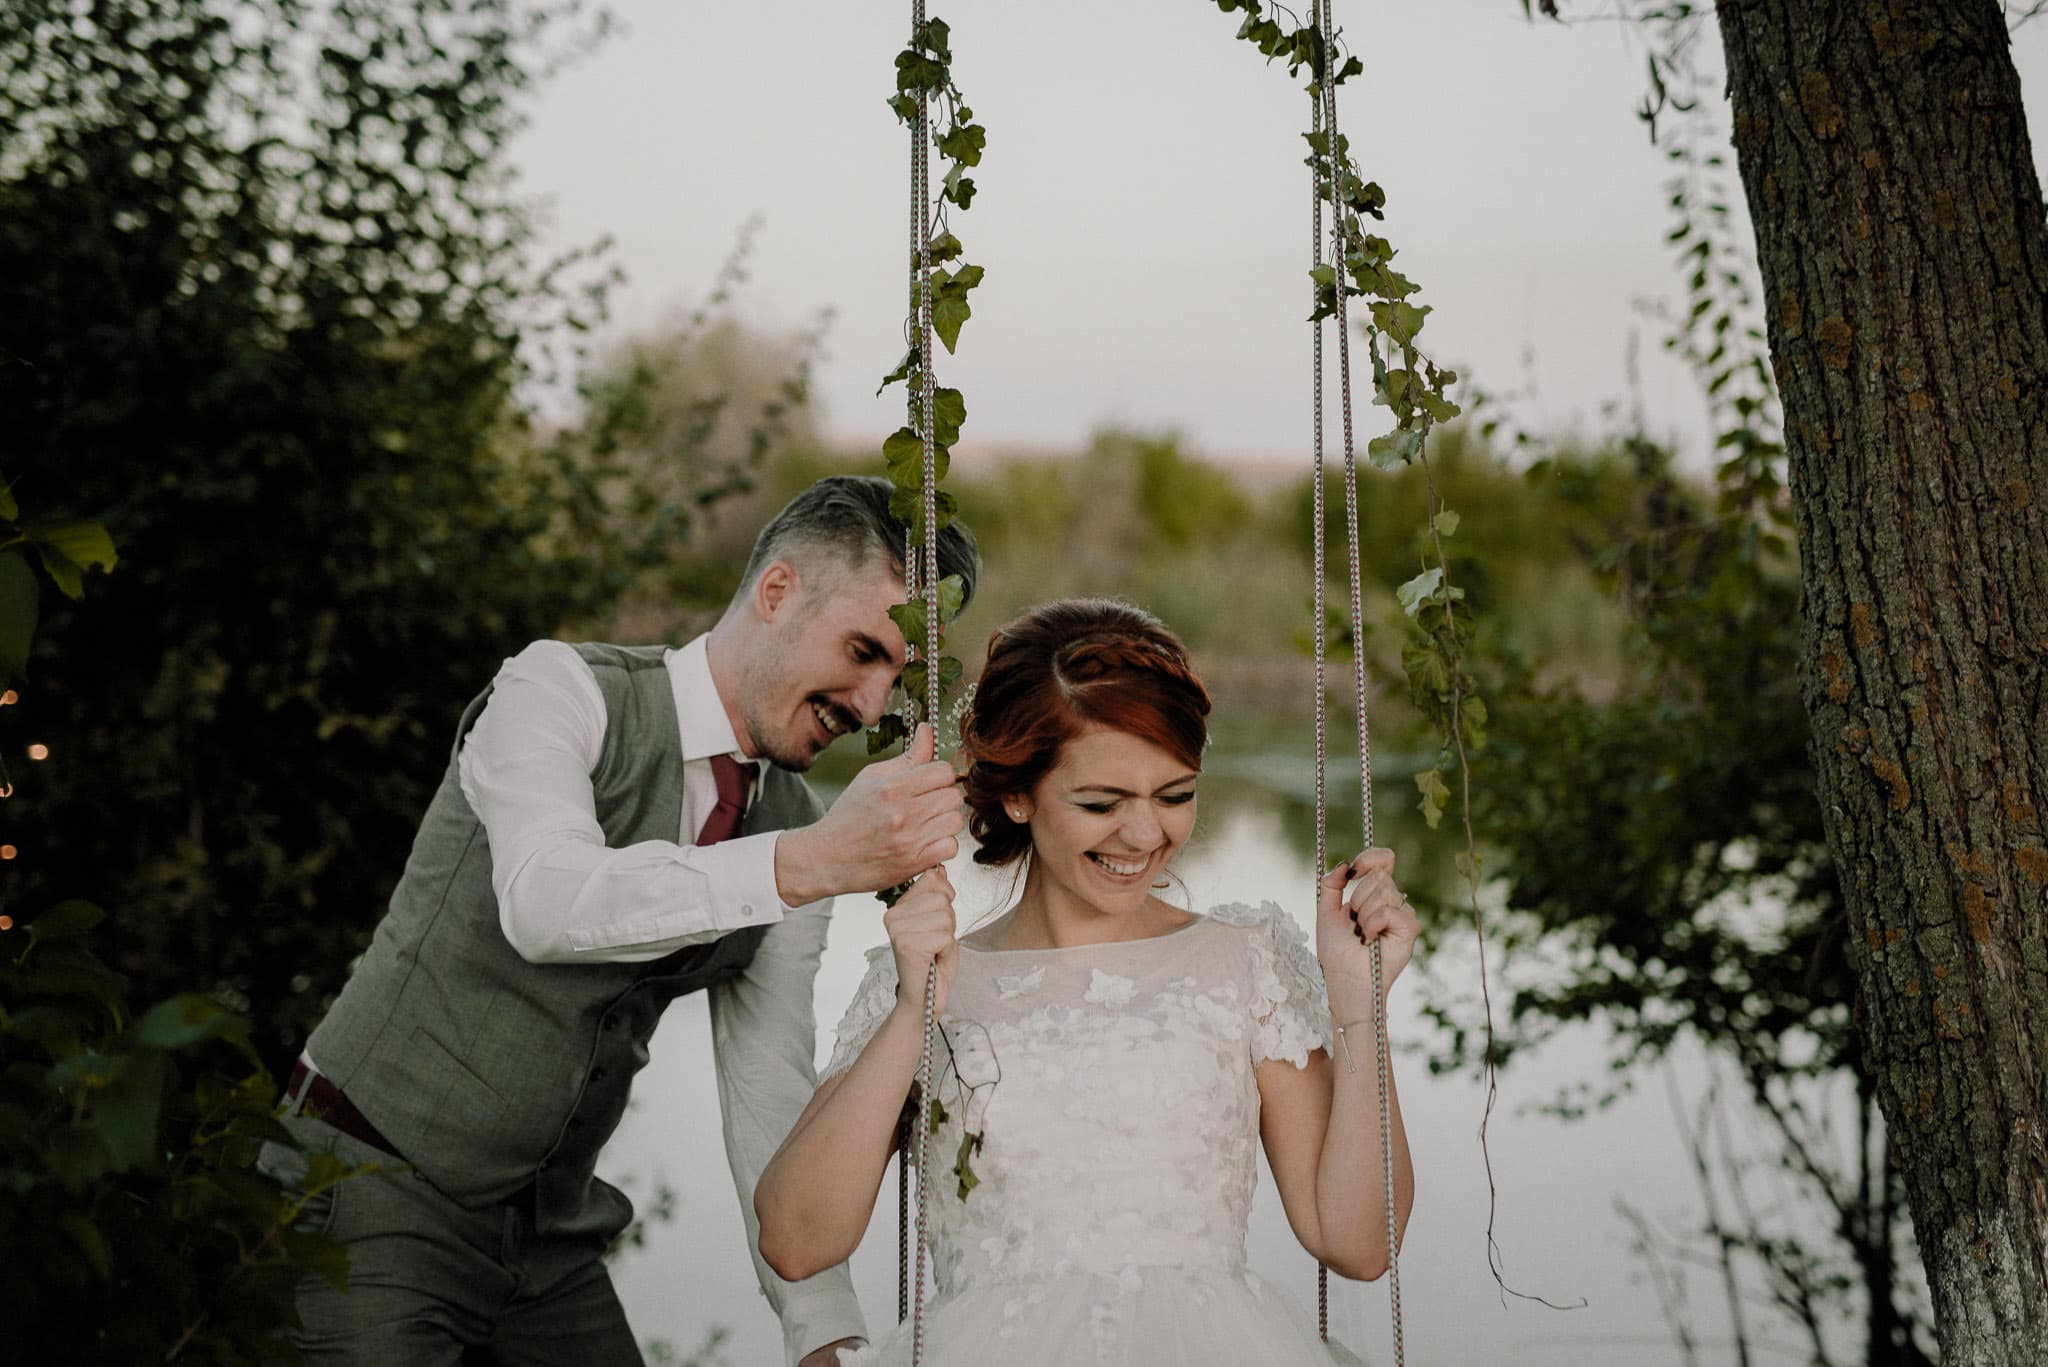 outdoor wedding swing used by fun couple